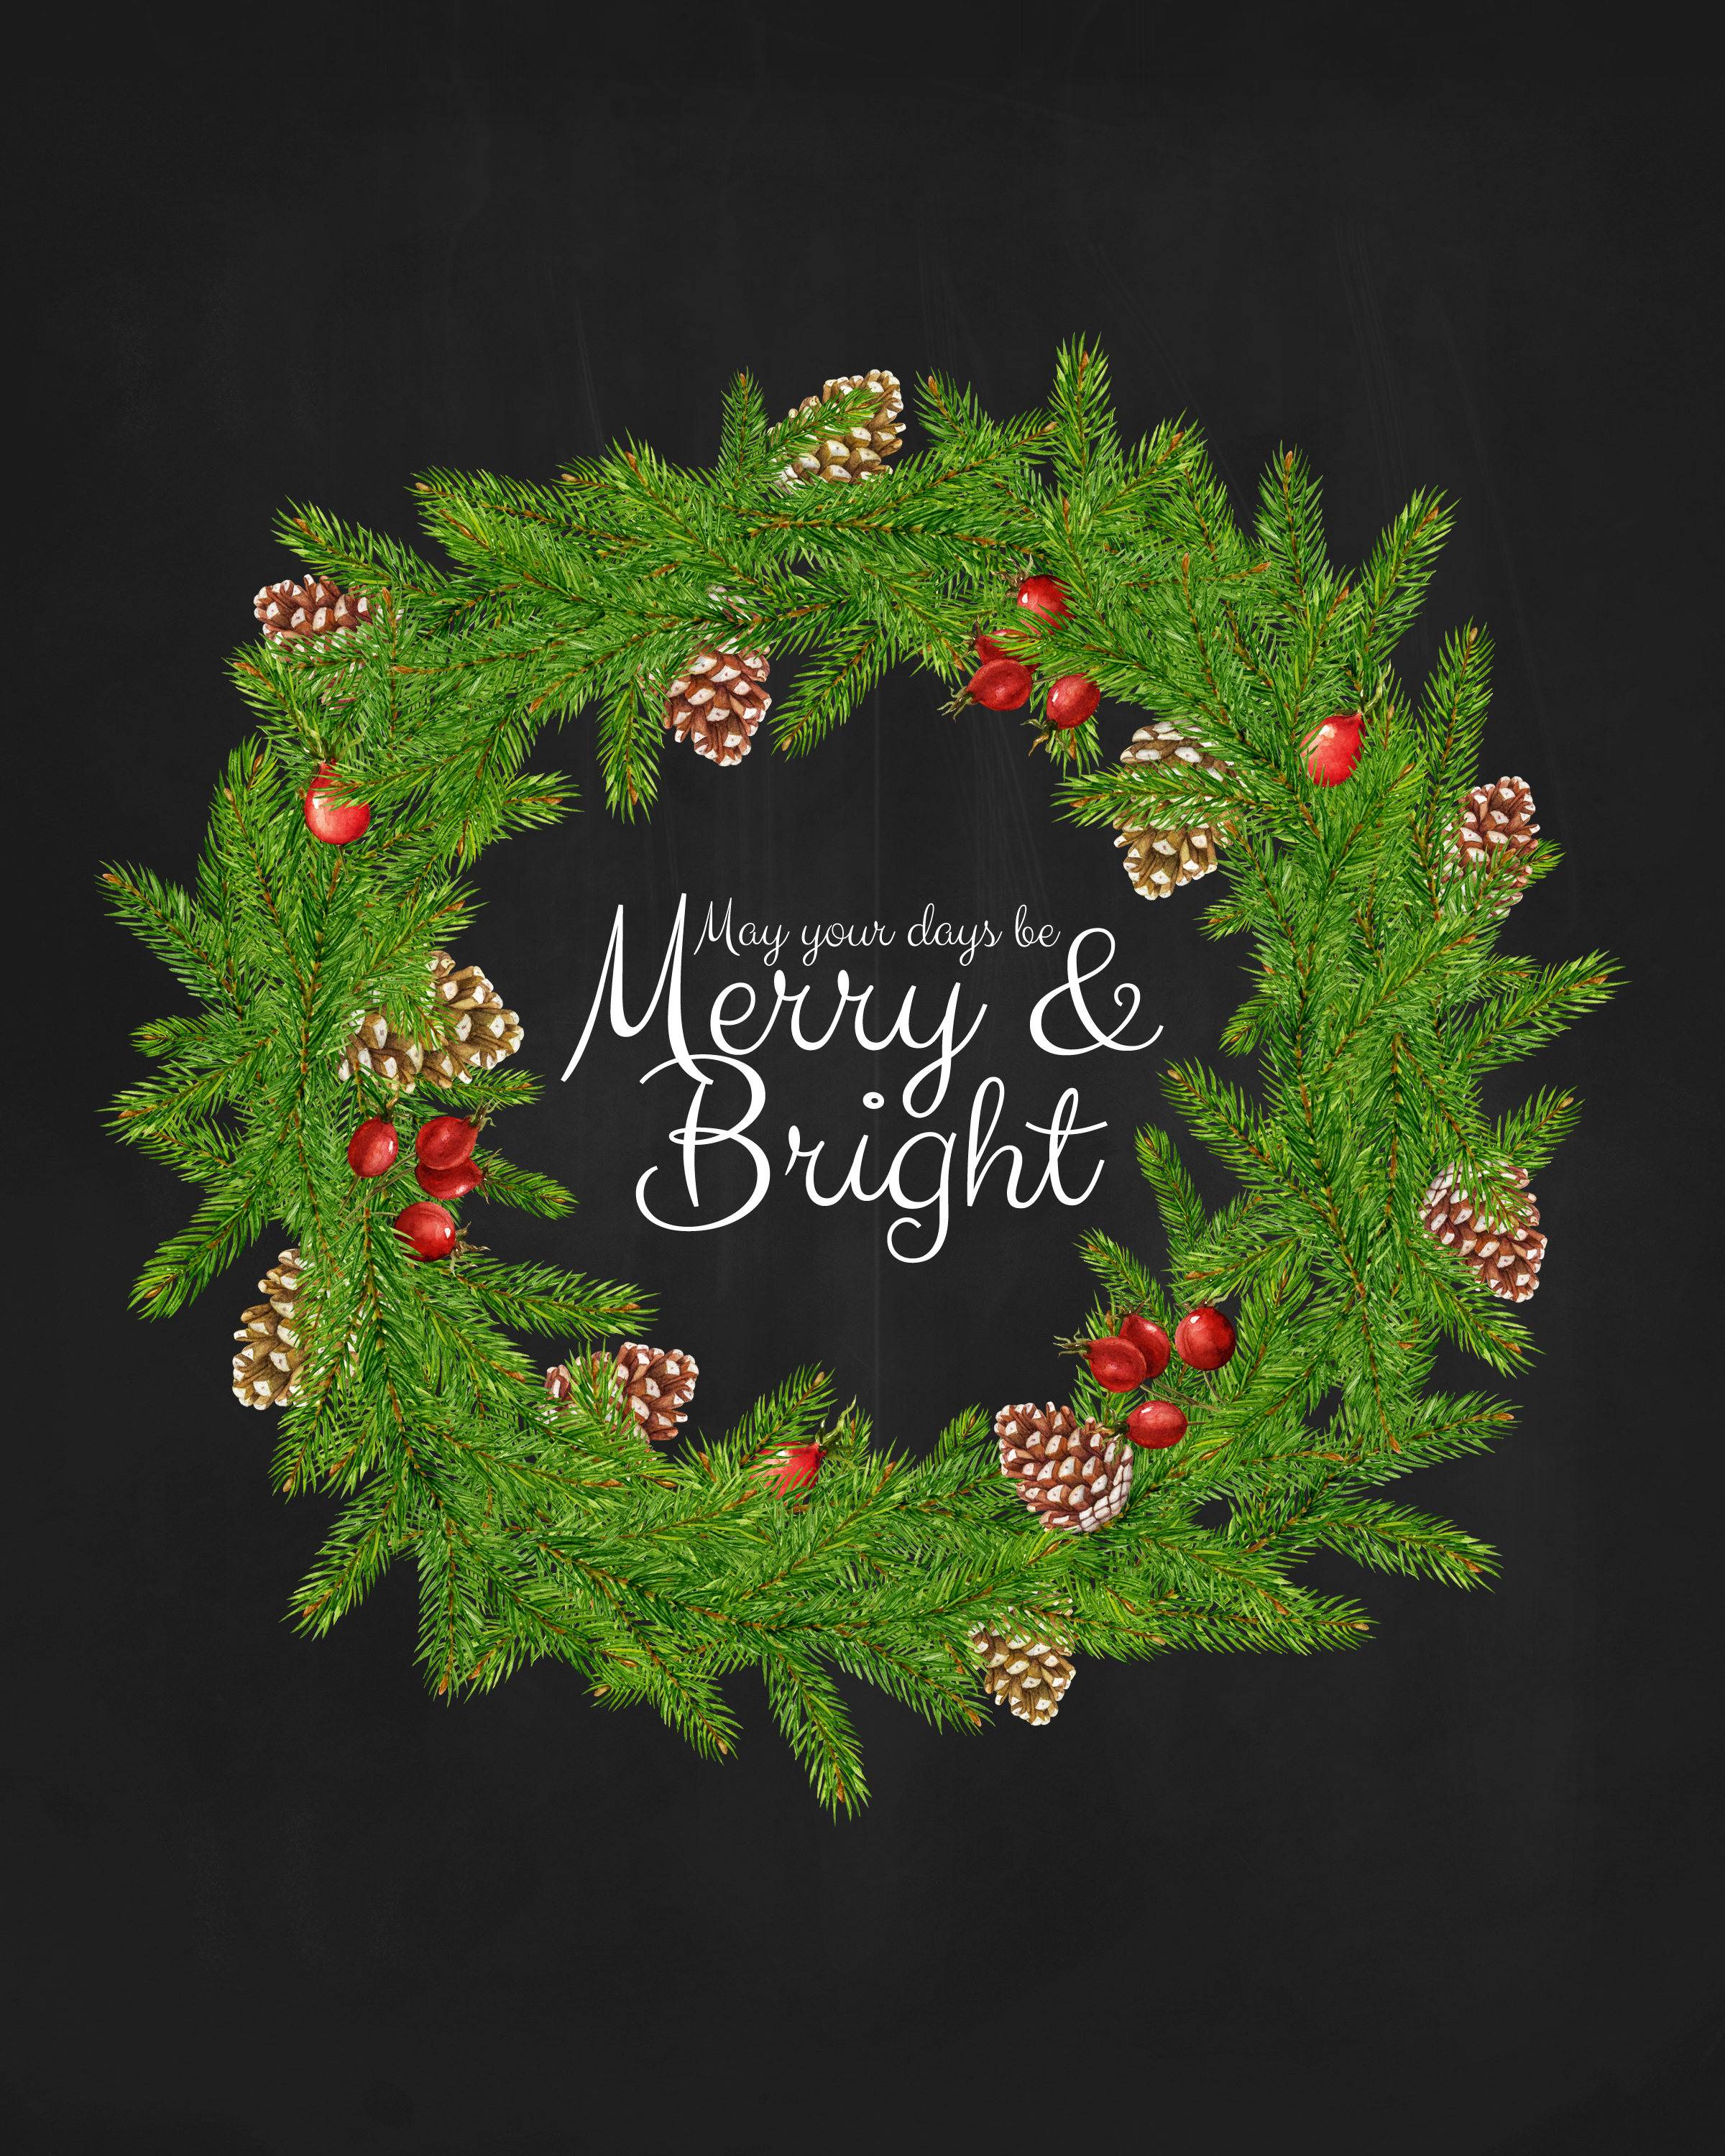 Free Christmas Printable /// May Your Days be Merry and Bright 8x10 Print -  The Cottage Market